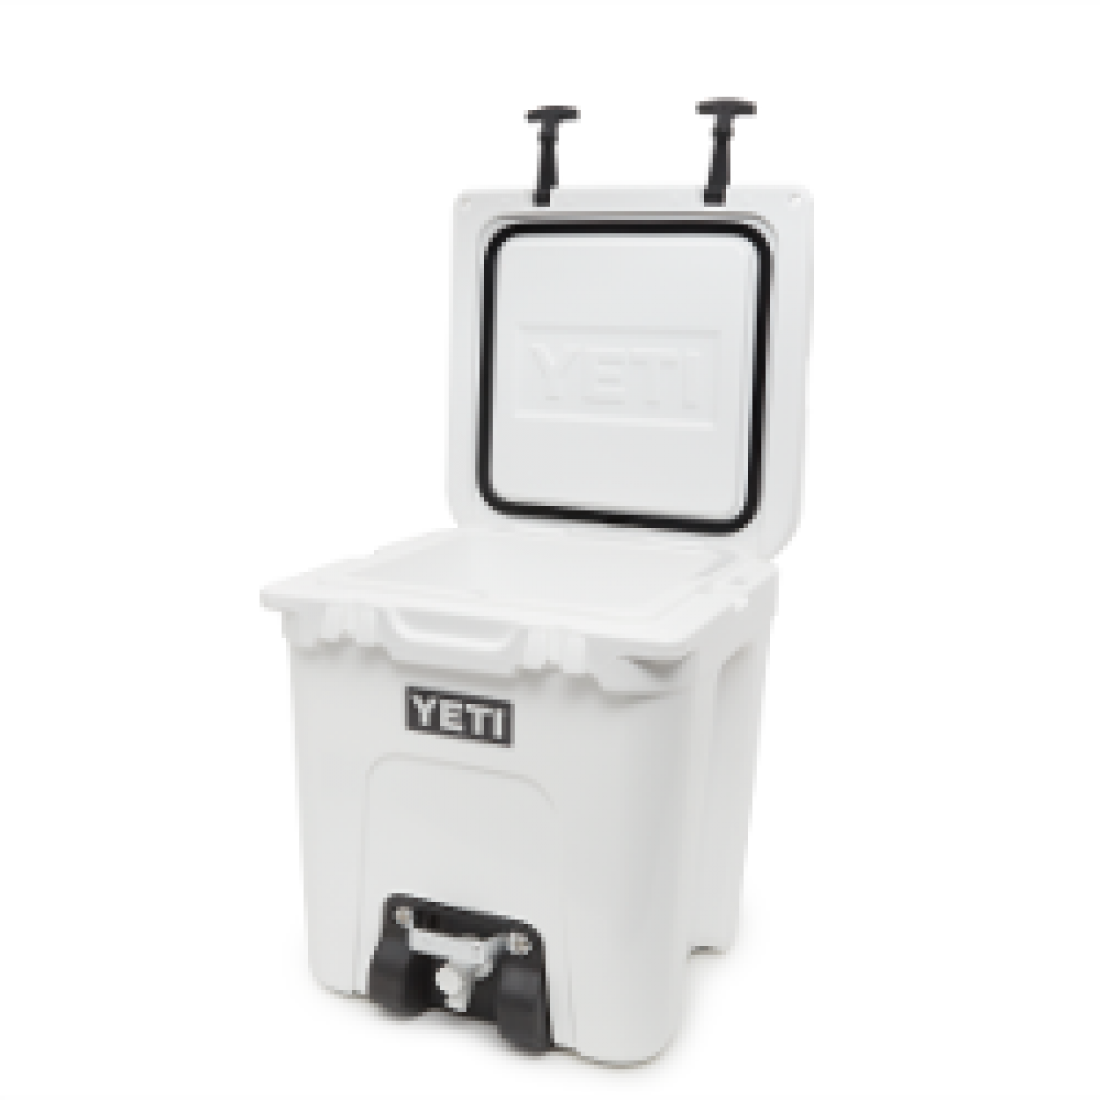 yeti silo water cooler referral